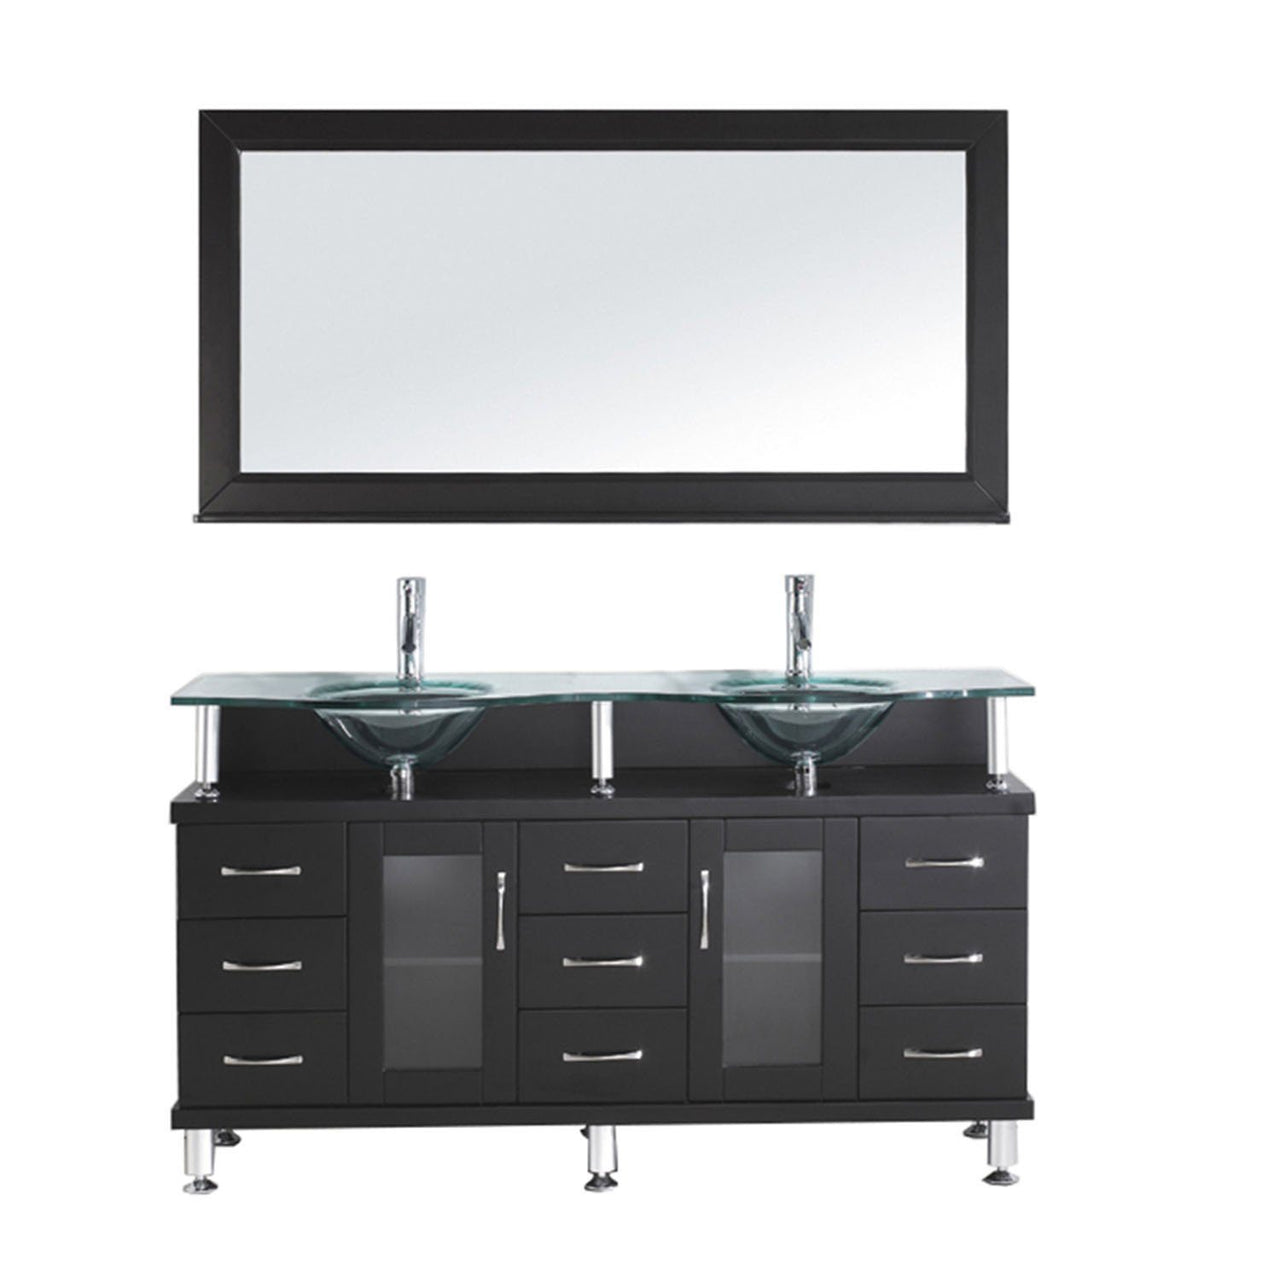 Virtu USA Vincente Rocco 59" Double Round Sink Espresso Top Vanity with Brushed Nickel Faucet and Mirror Vanity Virtu USA 